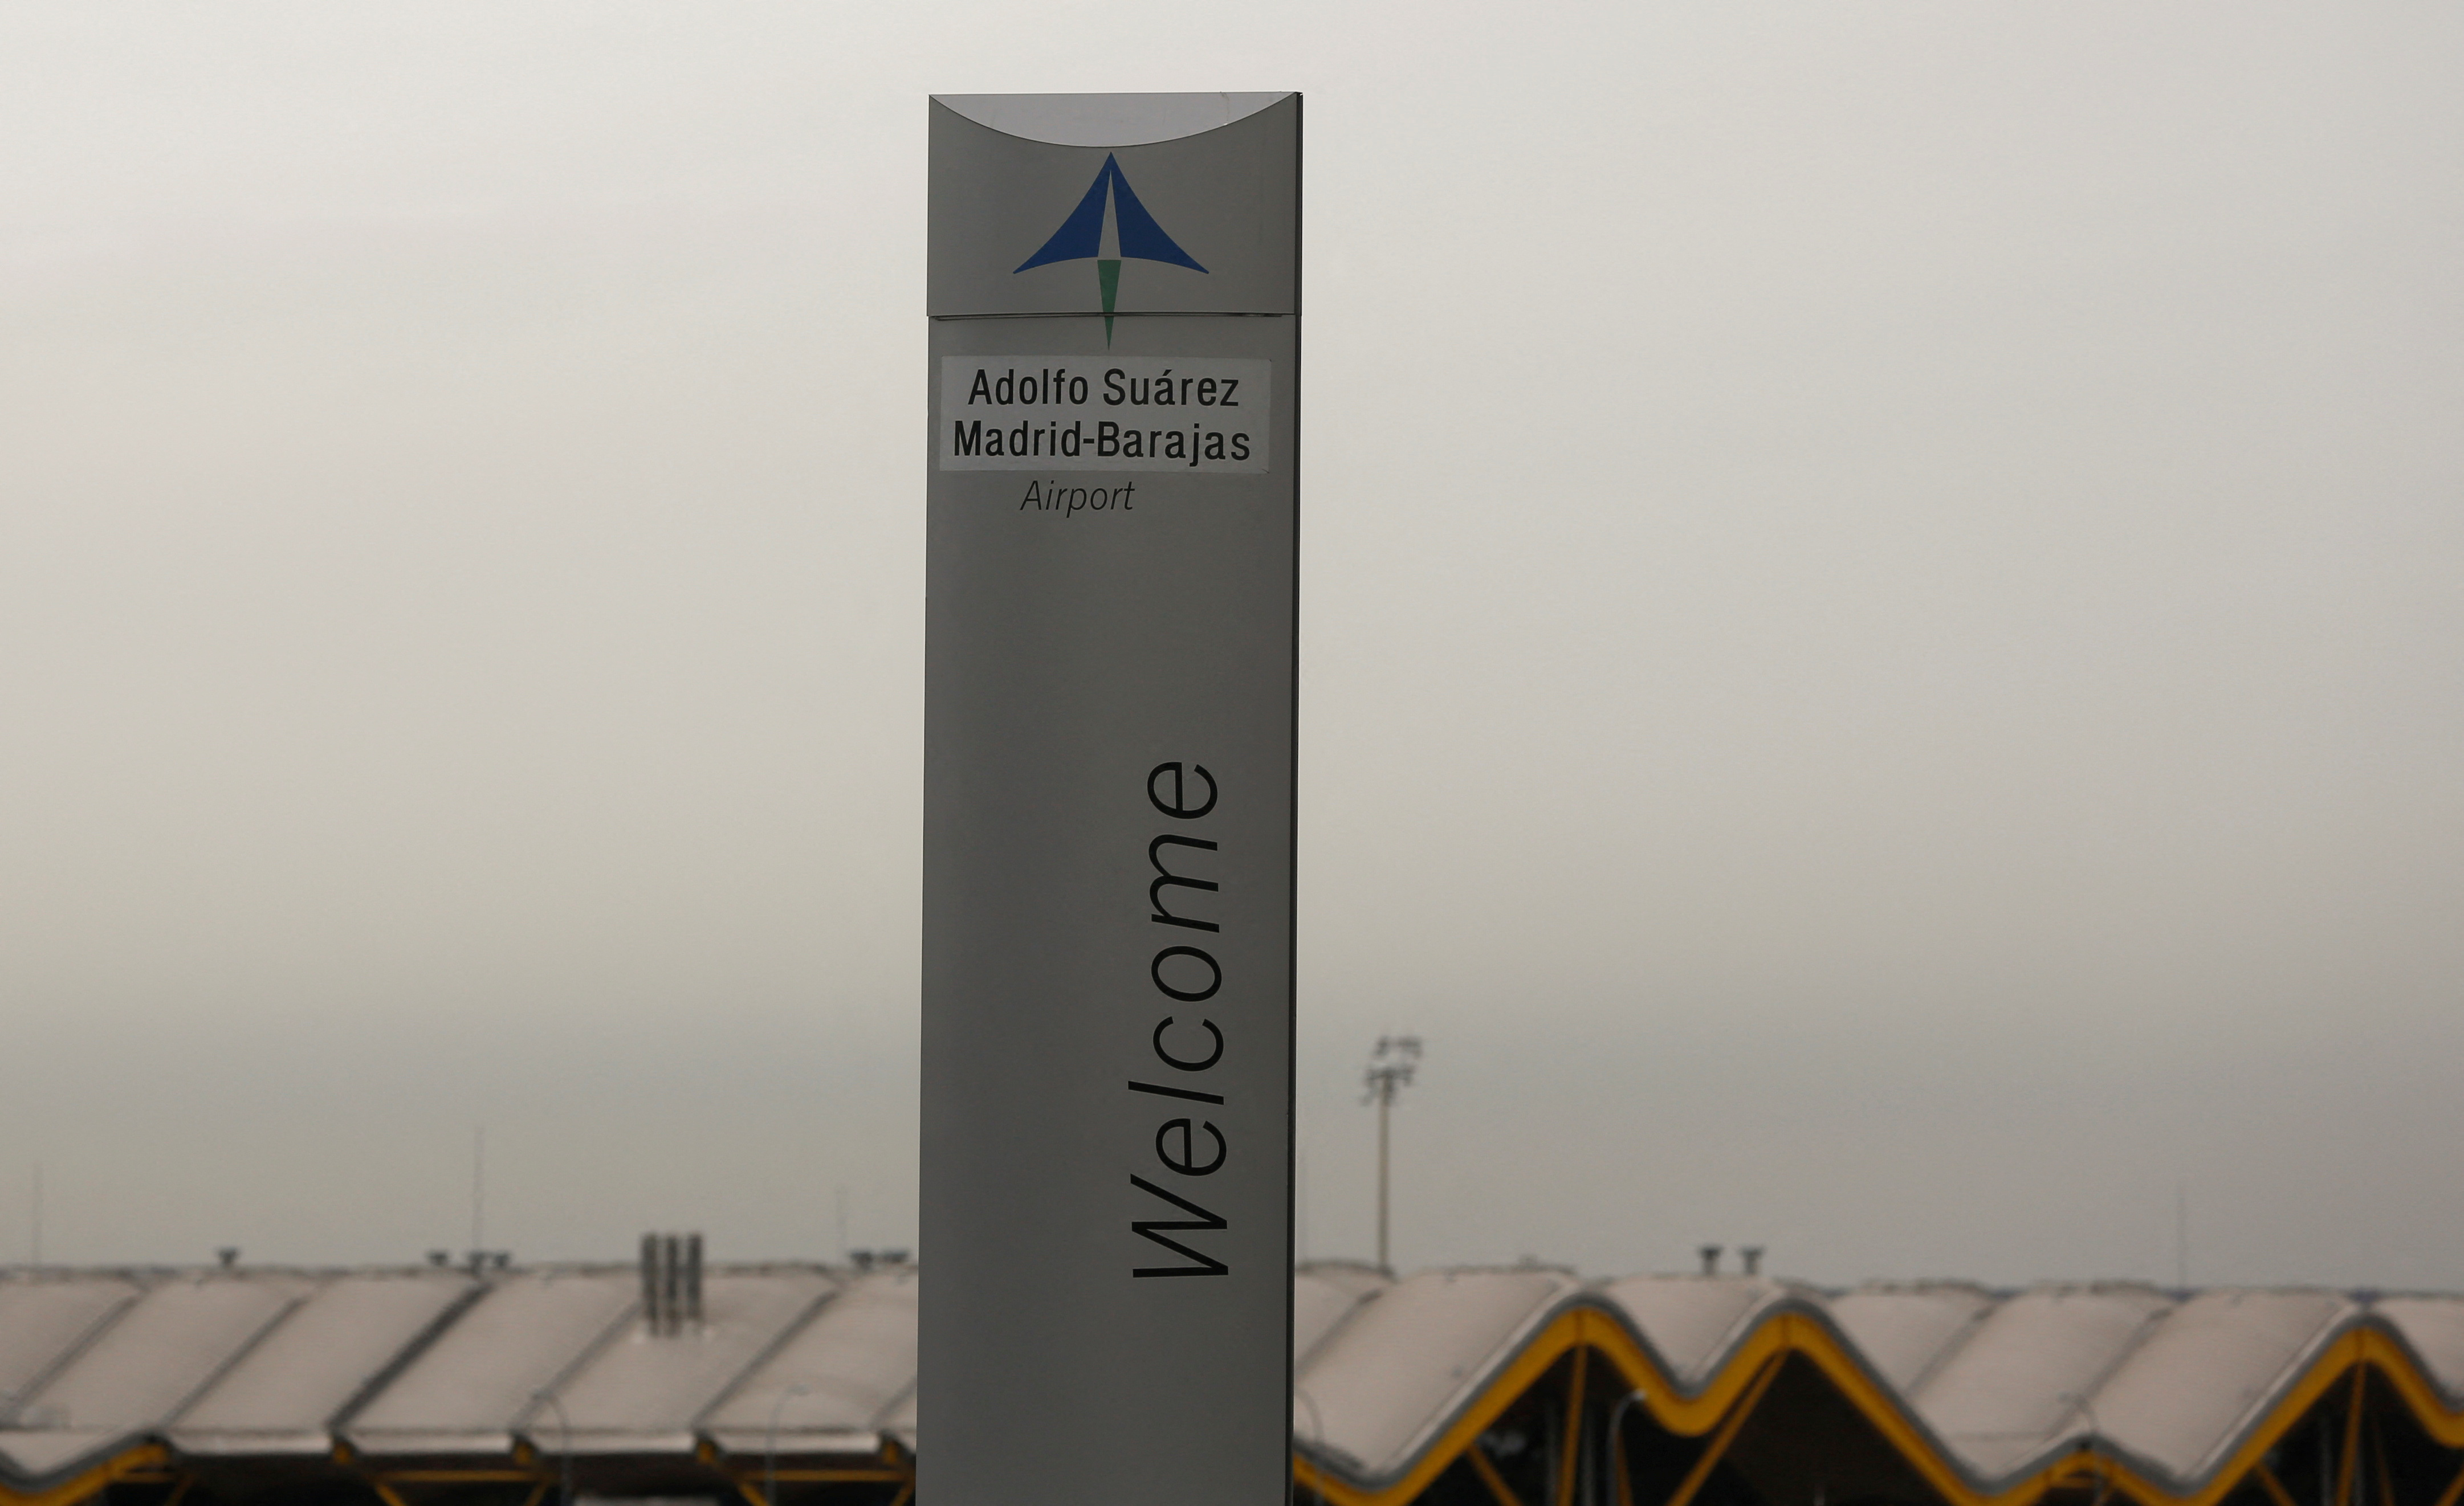 The logo of Spanish airports operator Aena is seen on the top of a welcoming sign outside Adolfo Suarez Barajas airport in Madrid